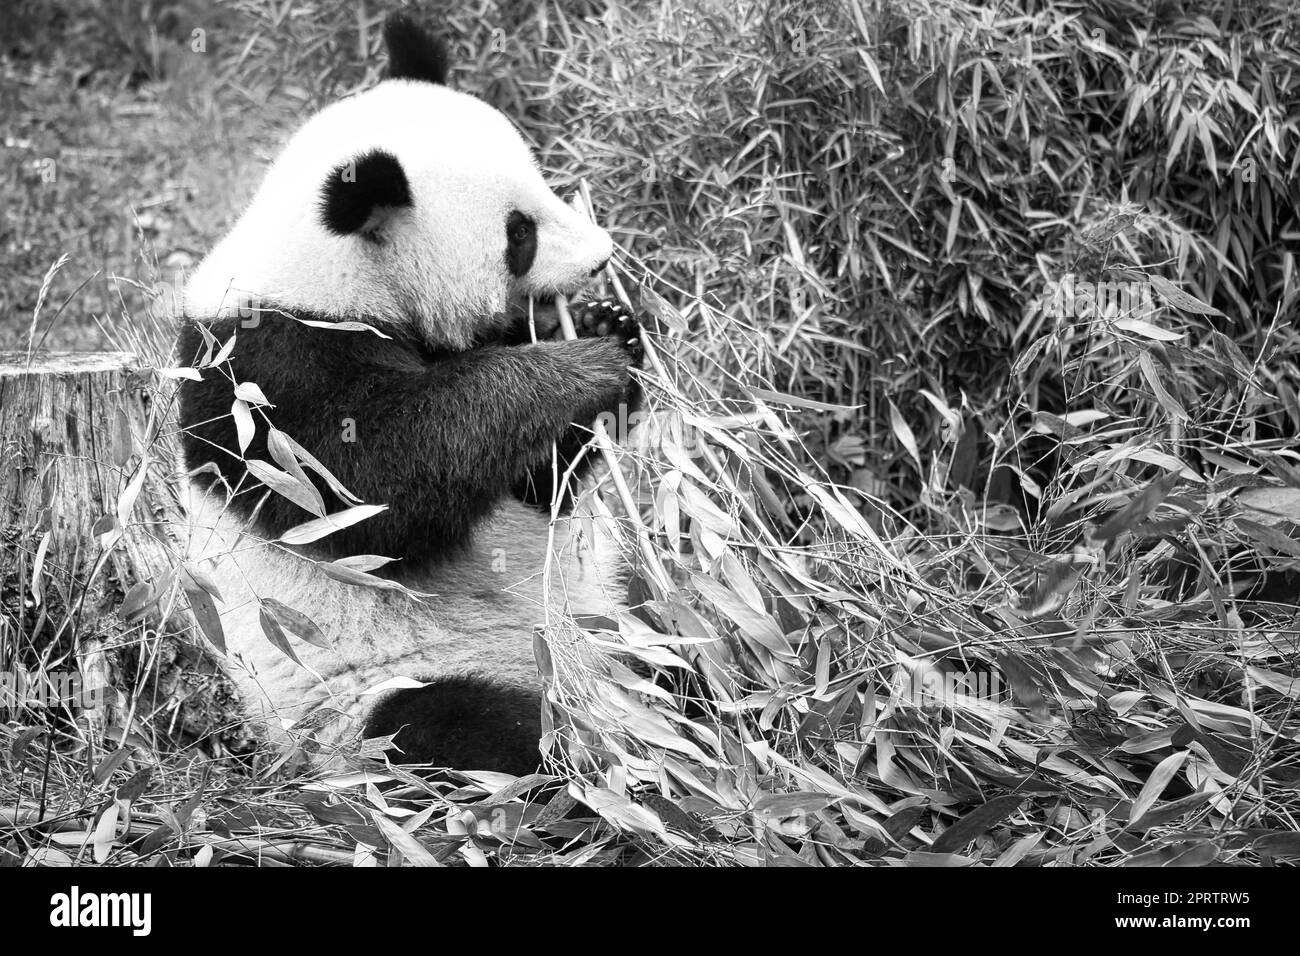 big panda in black and white, sitting eating bamboo. Endangered species. Stock Photo